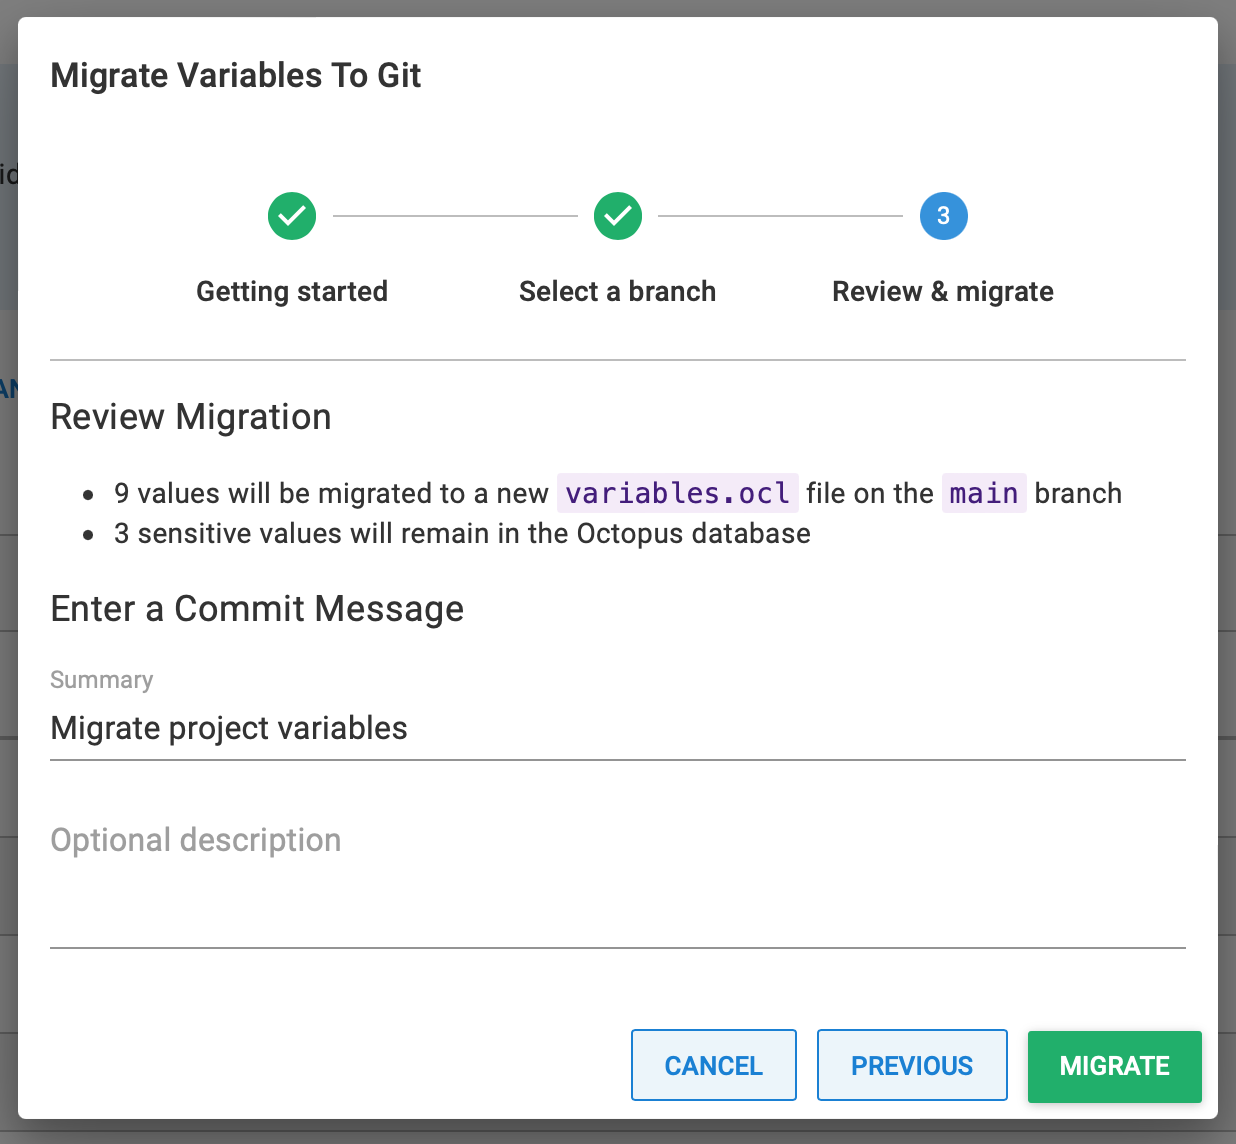 Screenshot of page 3 (review and migrate) on Git variables migration wizard, showing 9 values will be migrated to a new variables.ocl file on the main branch, and 3 sensitive values will remain in the database. Commit message populated with 'Migrate project variables'